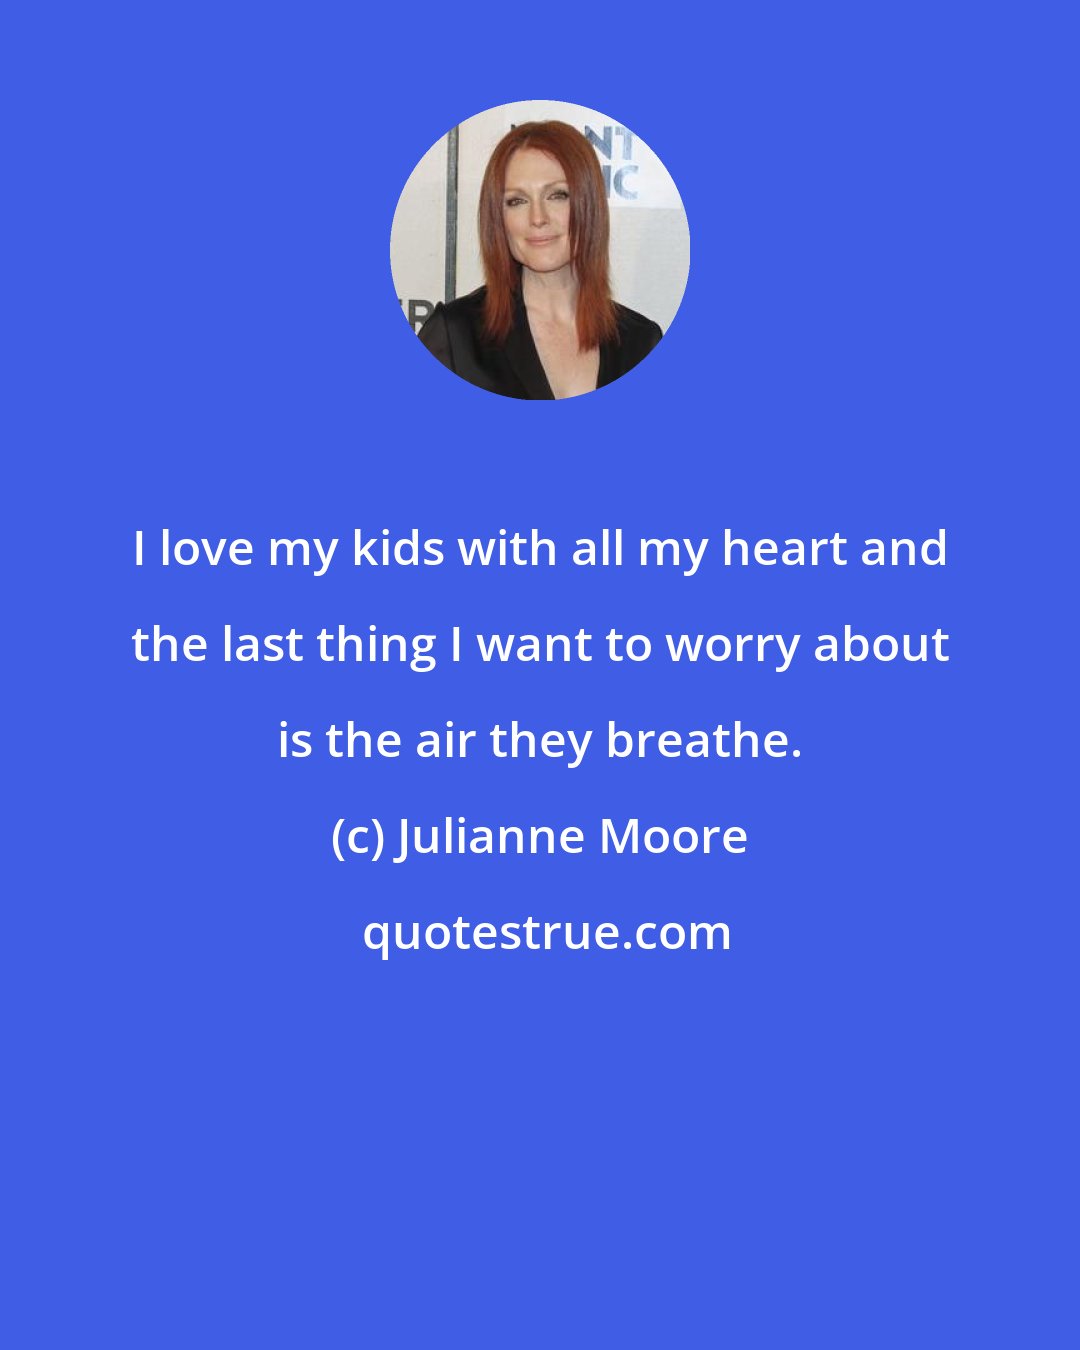 Julianne Moore: I love my kids with all my heart and the last thing I want to worry about is the air they breathe.